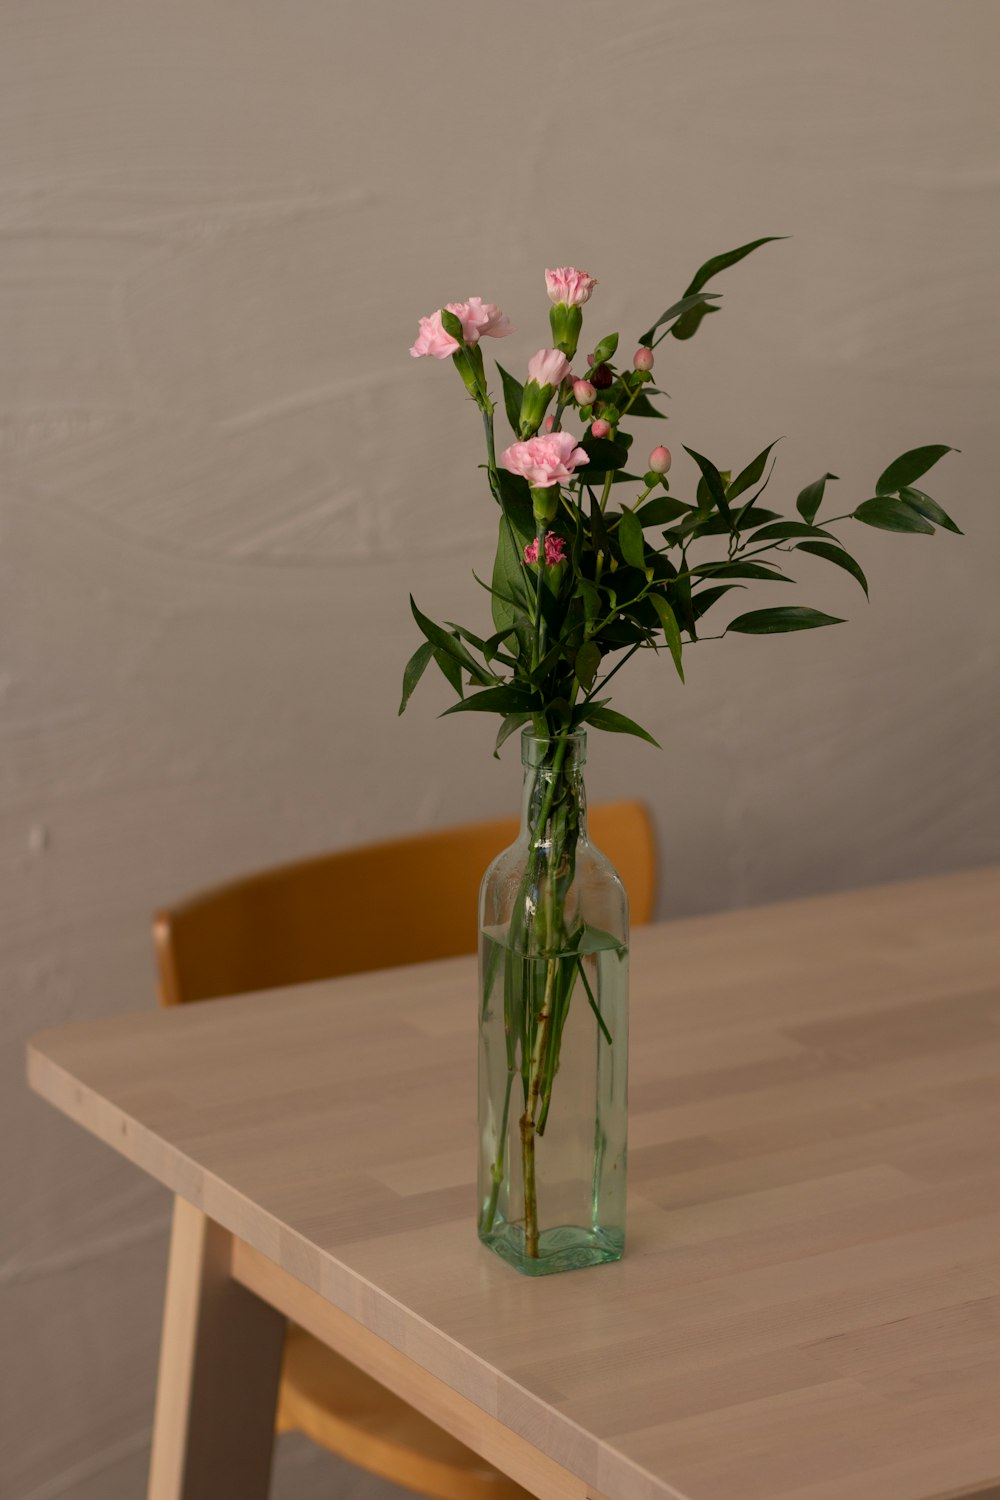 pink and white flowers in clear glass vase on brown wooden table